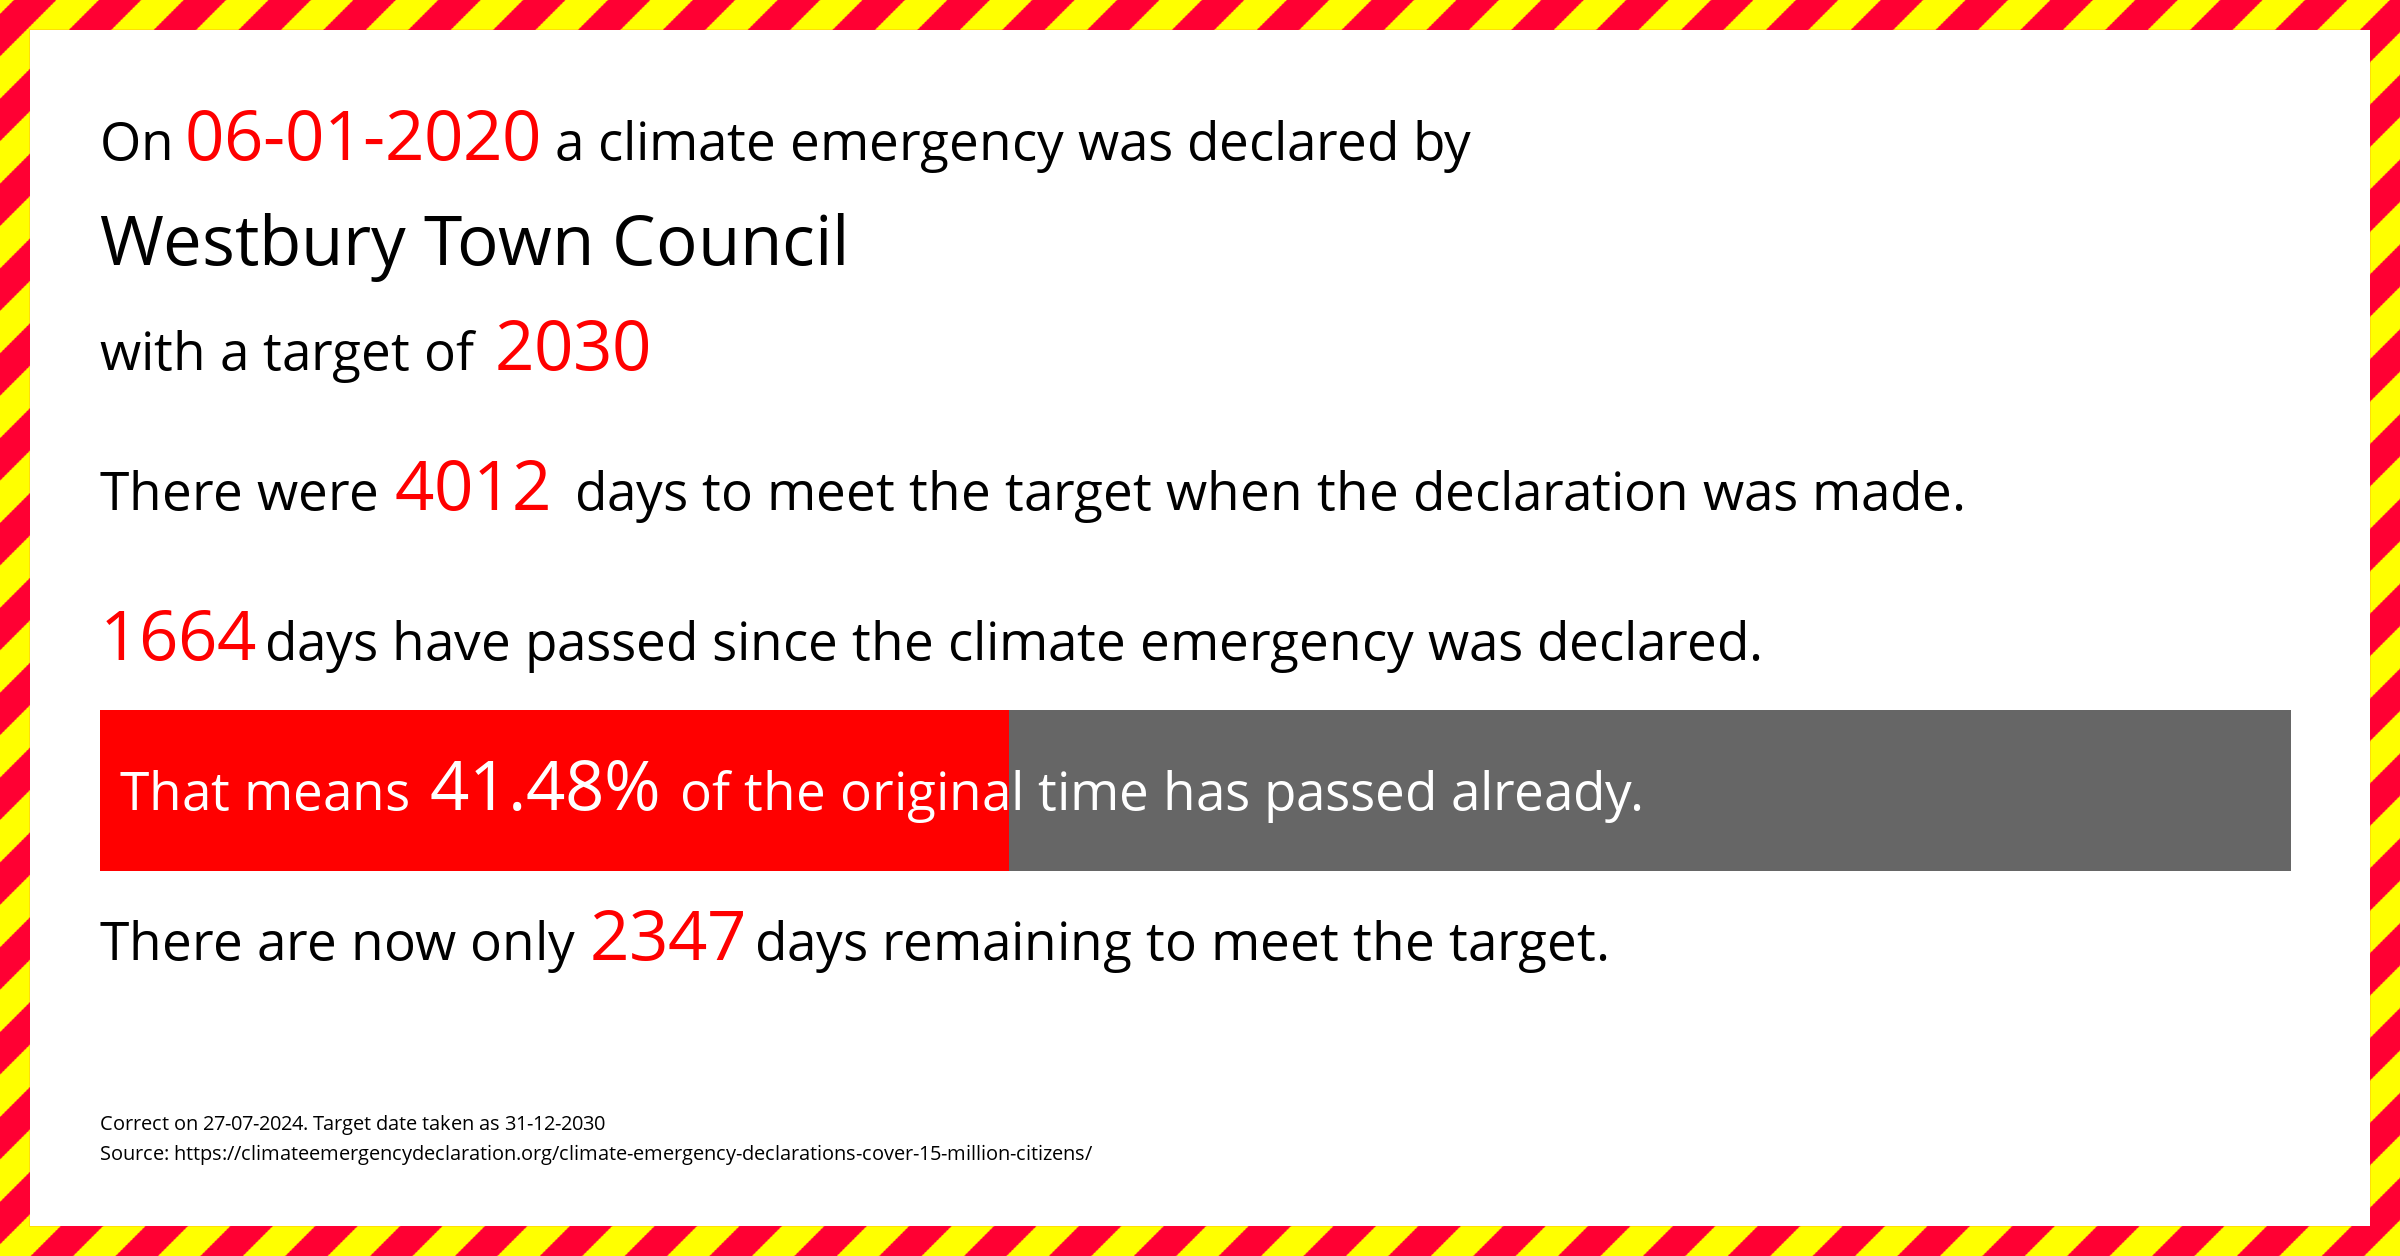 Westbury Town Council declared a Climate emergency on Monday 6th January 2020, with a target of 2030.